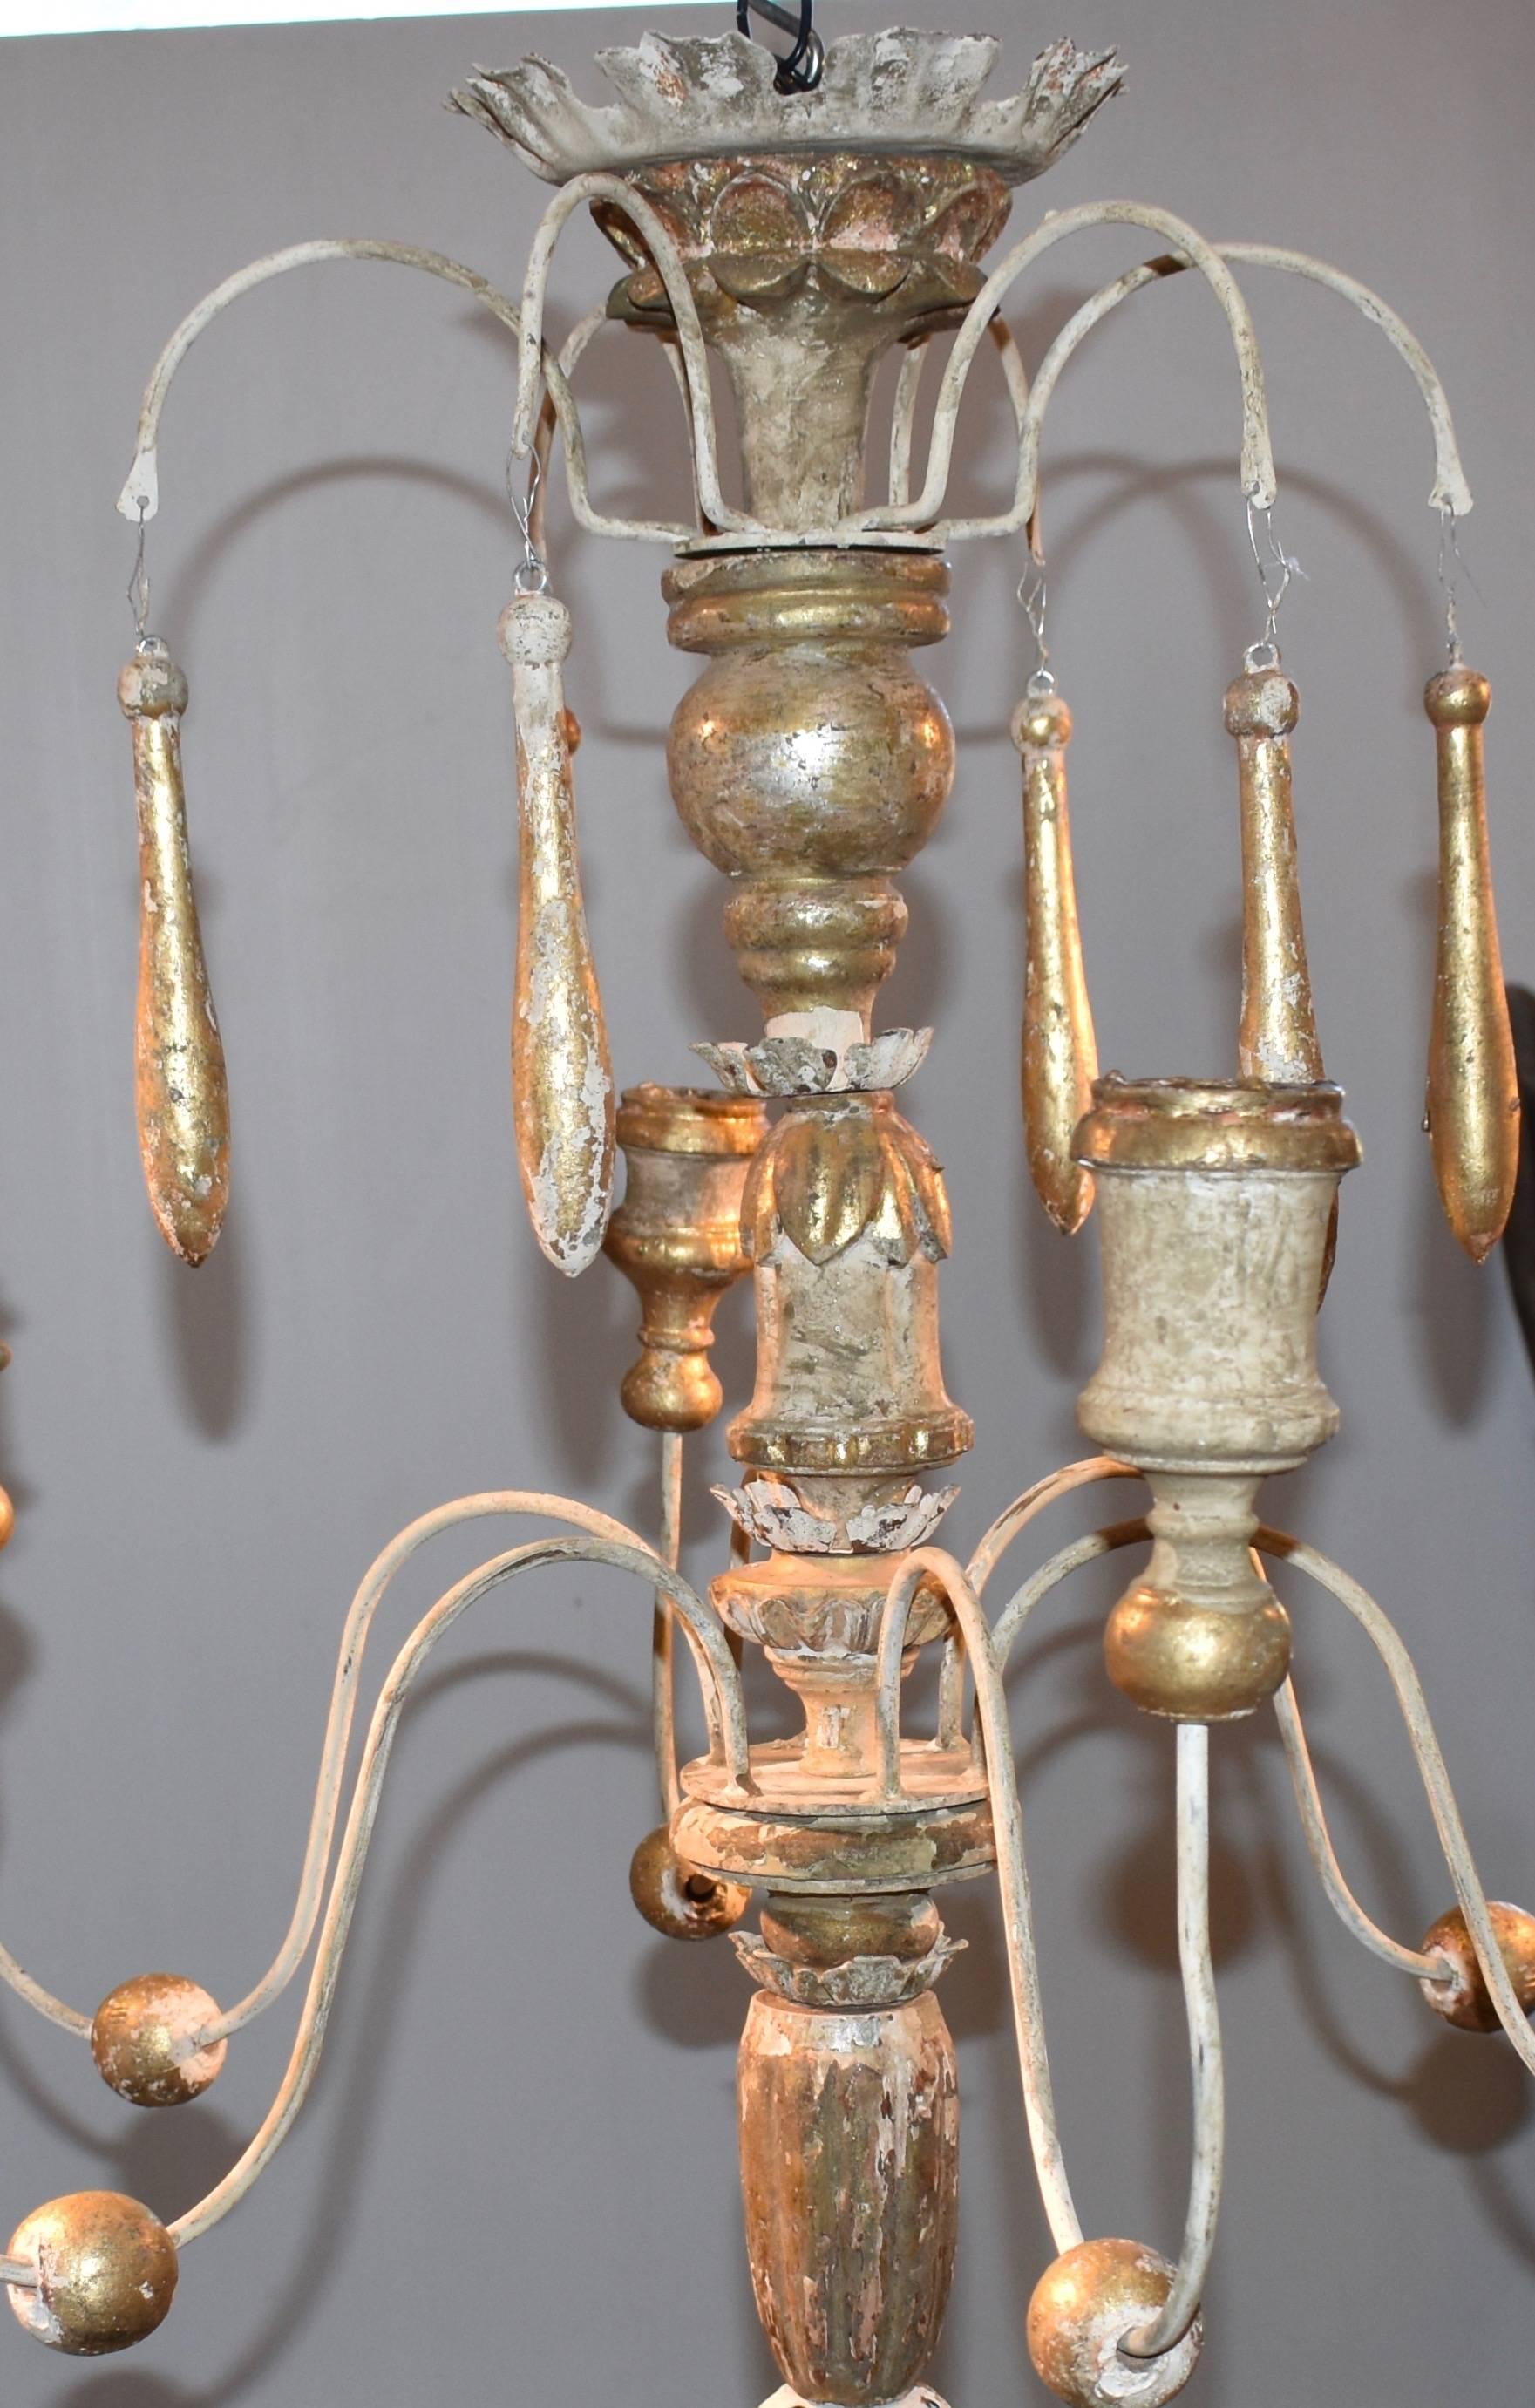 Beautiful wooden chandelier made from 18th century Italian church candlesticks. Great aged patina. Lovely cream white with hints of gilded gold color. Not yet wired. Check out my other listing of a similar chandelier, the two could make a great pair.